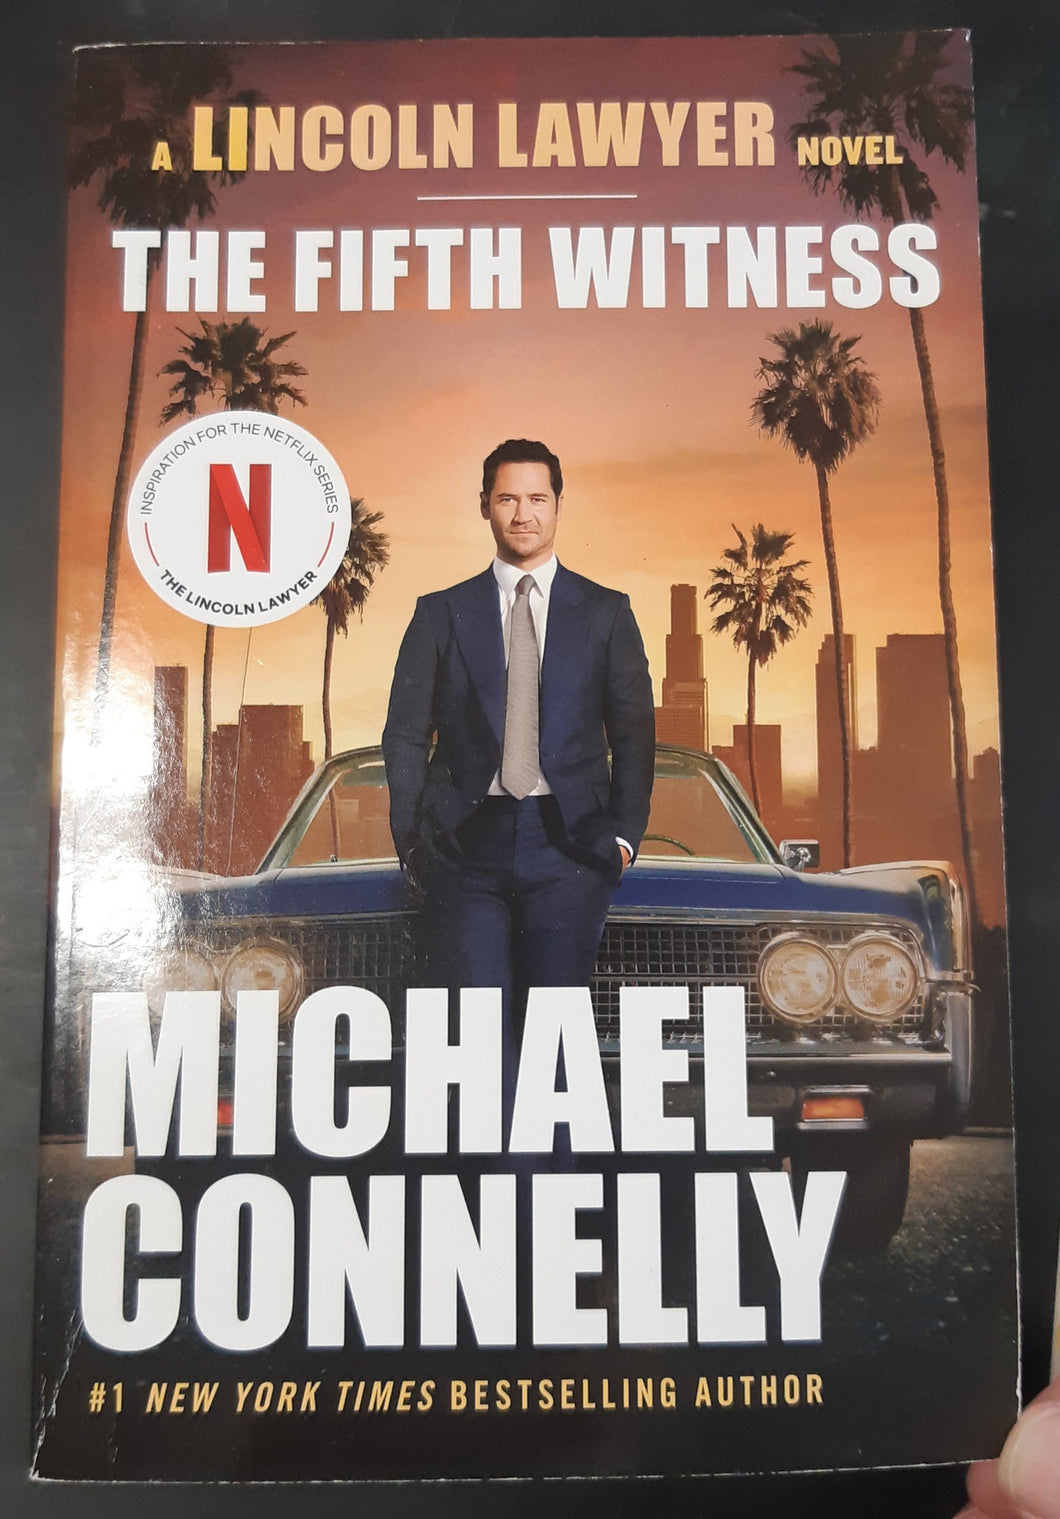 The Fifth Witness: A Lincoln Lawyer Novel by Michael Connelly